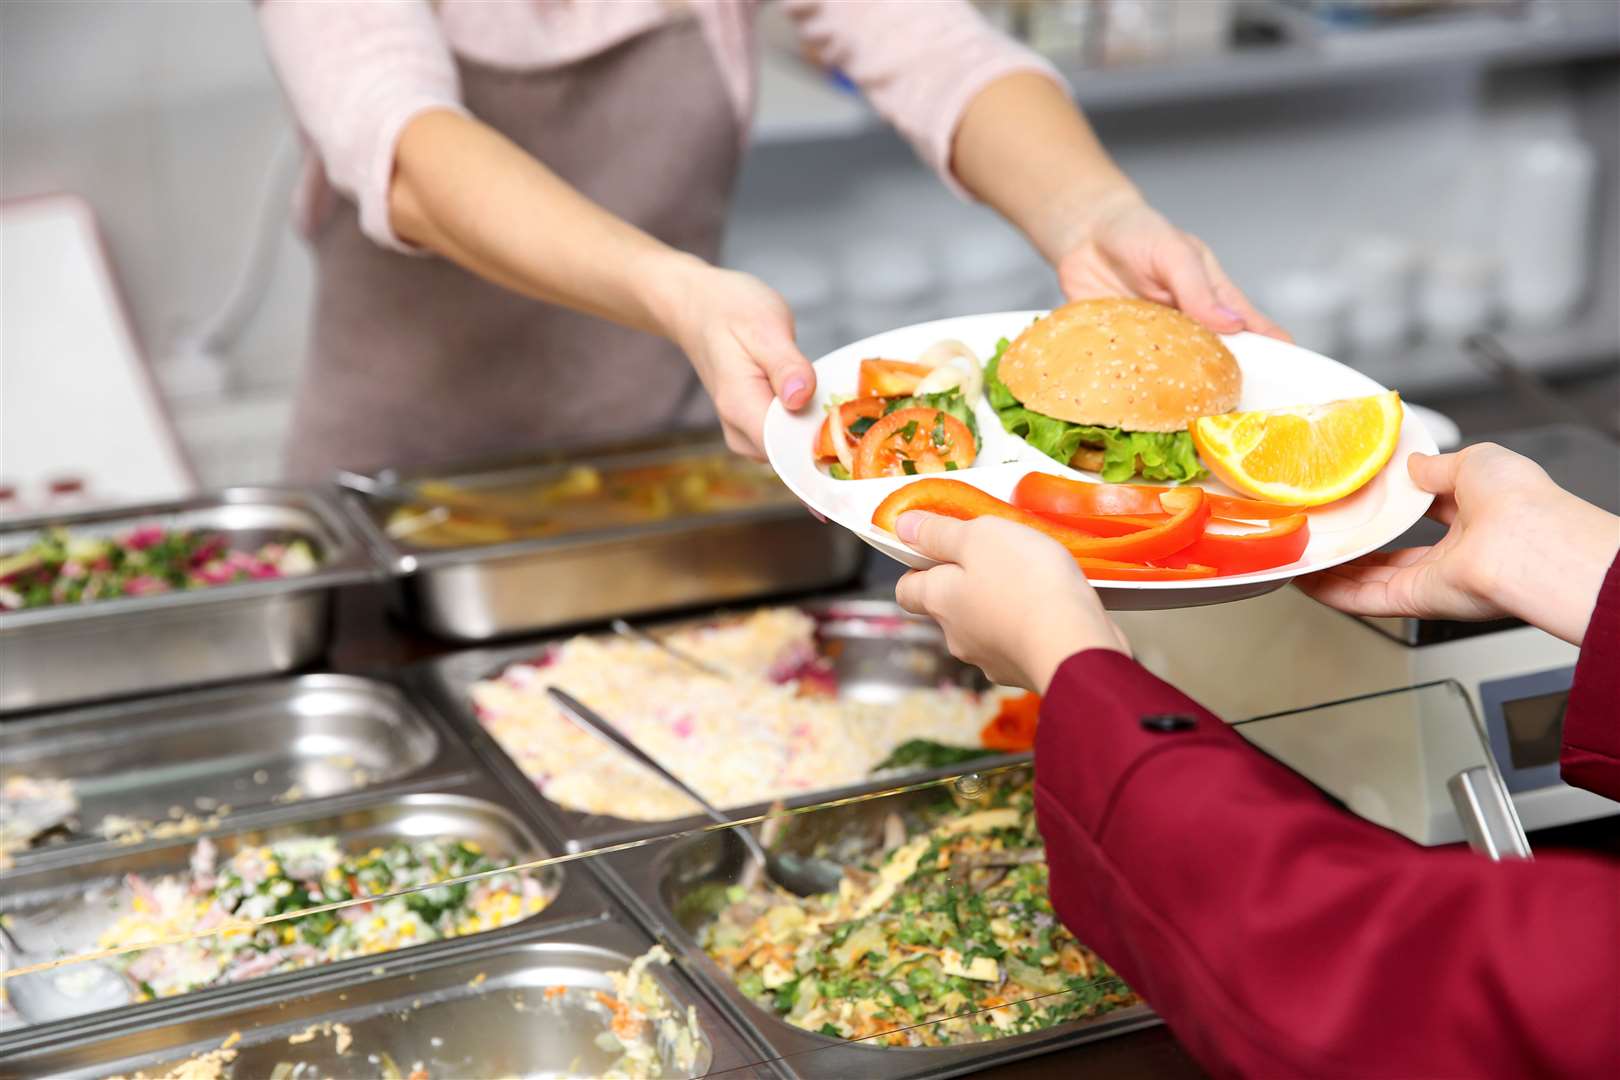 The backlog of payments for school meals goes back more than a year and in some instances up to seven years.